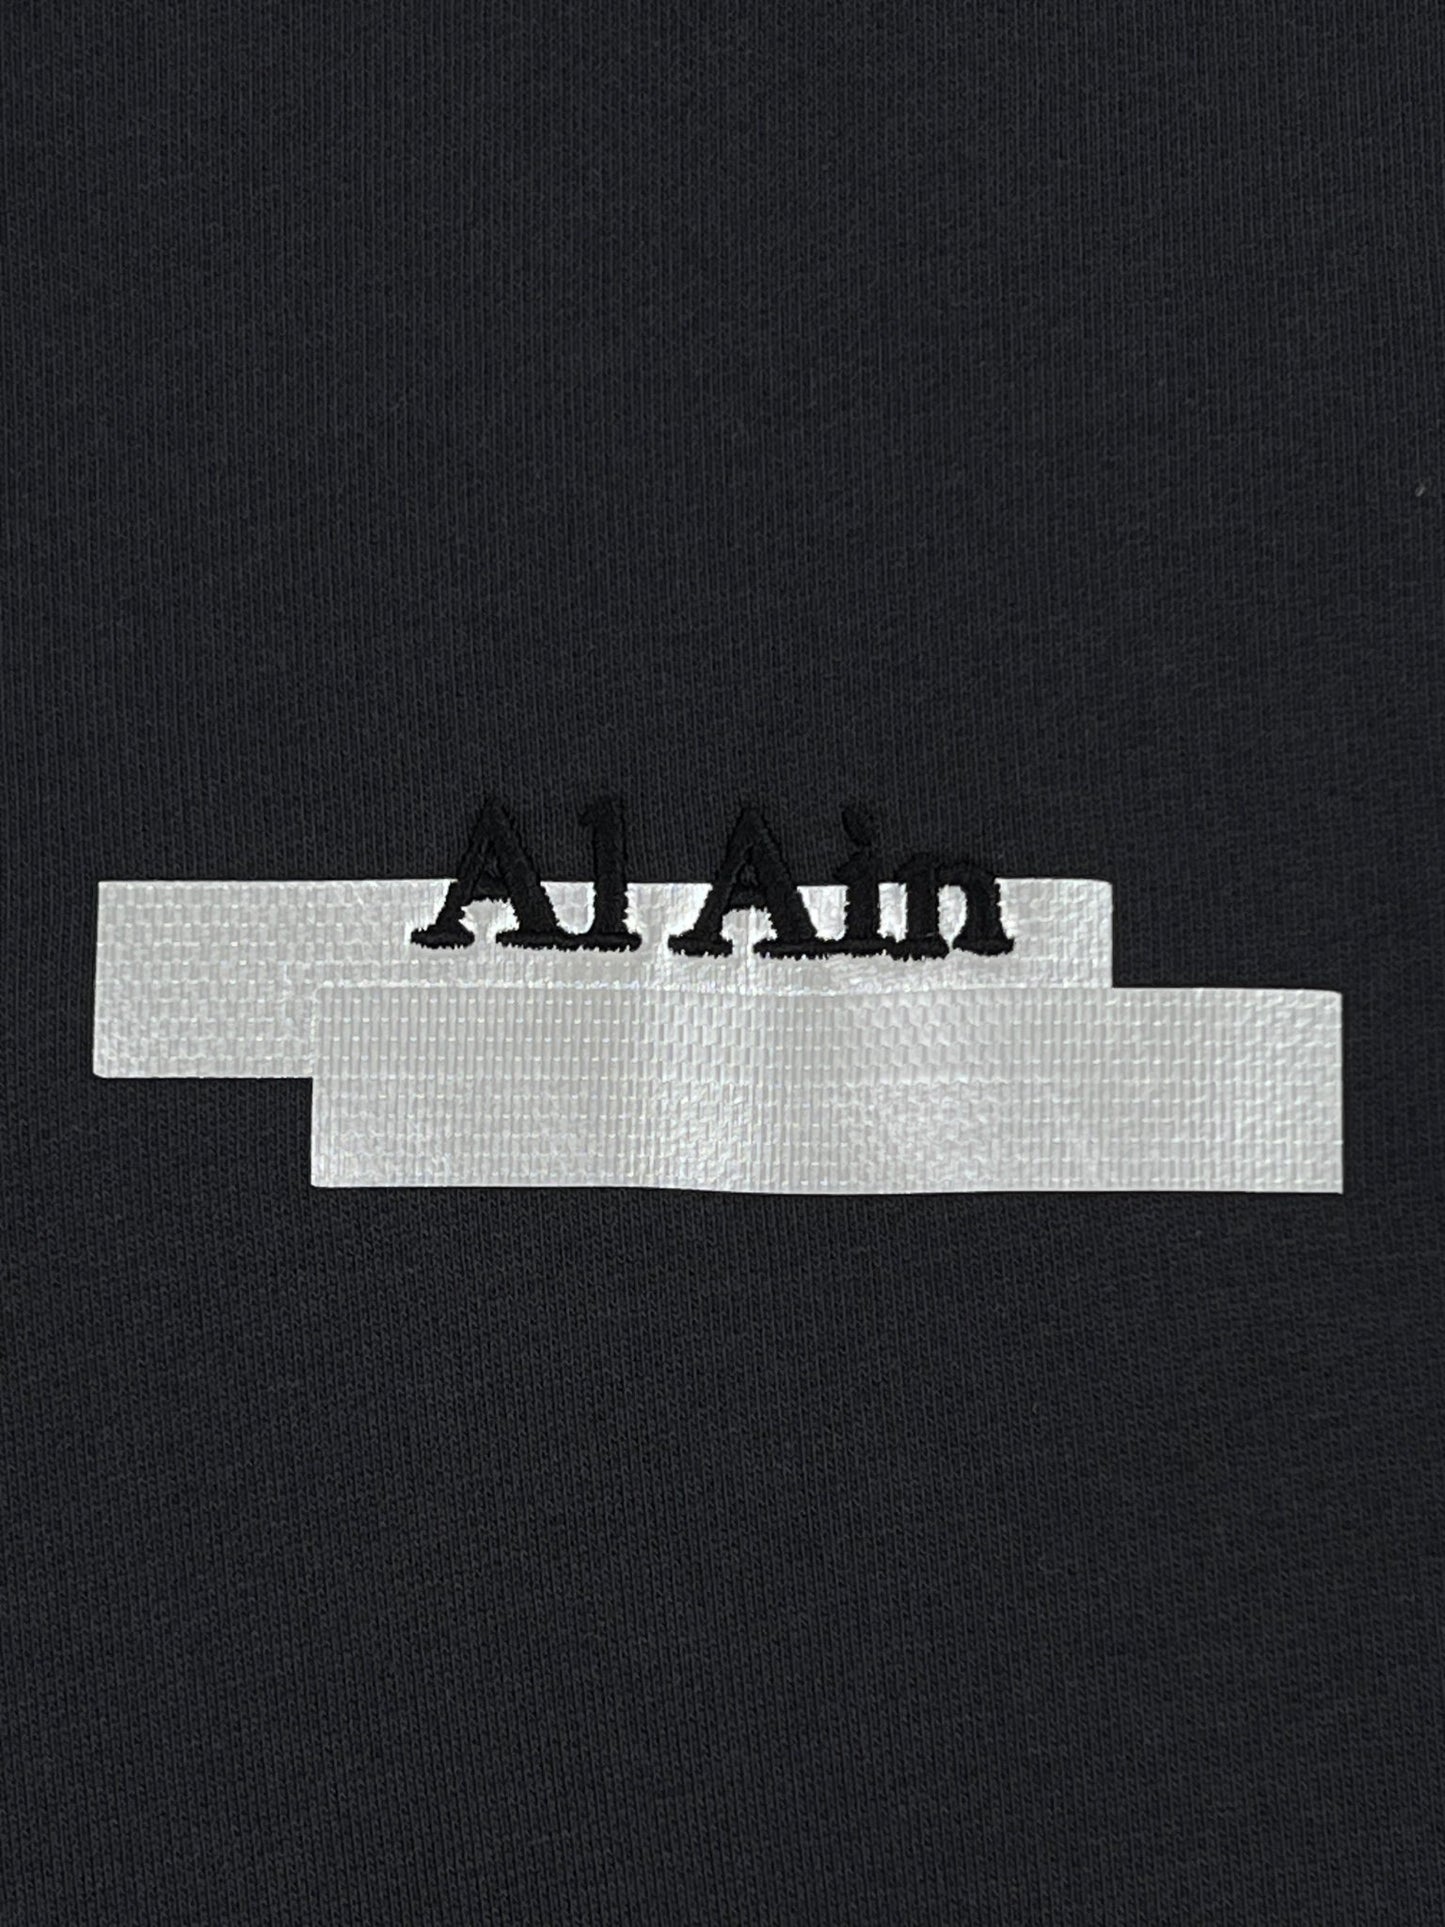 Close-up of a black fabric texture with a white label bearing the text "AL AIN AHZX S103 SECRET NOIR" in black letters.